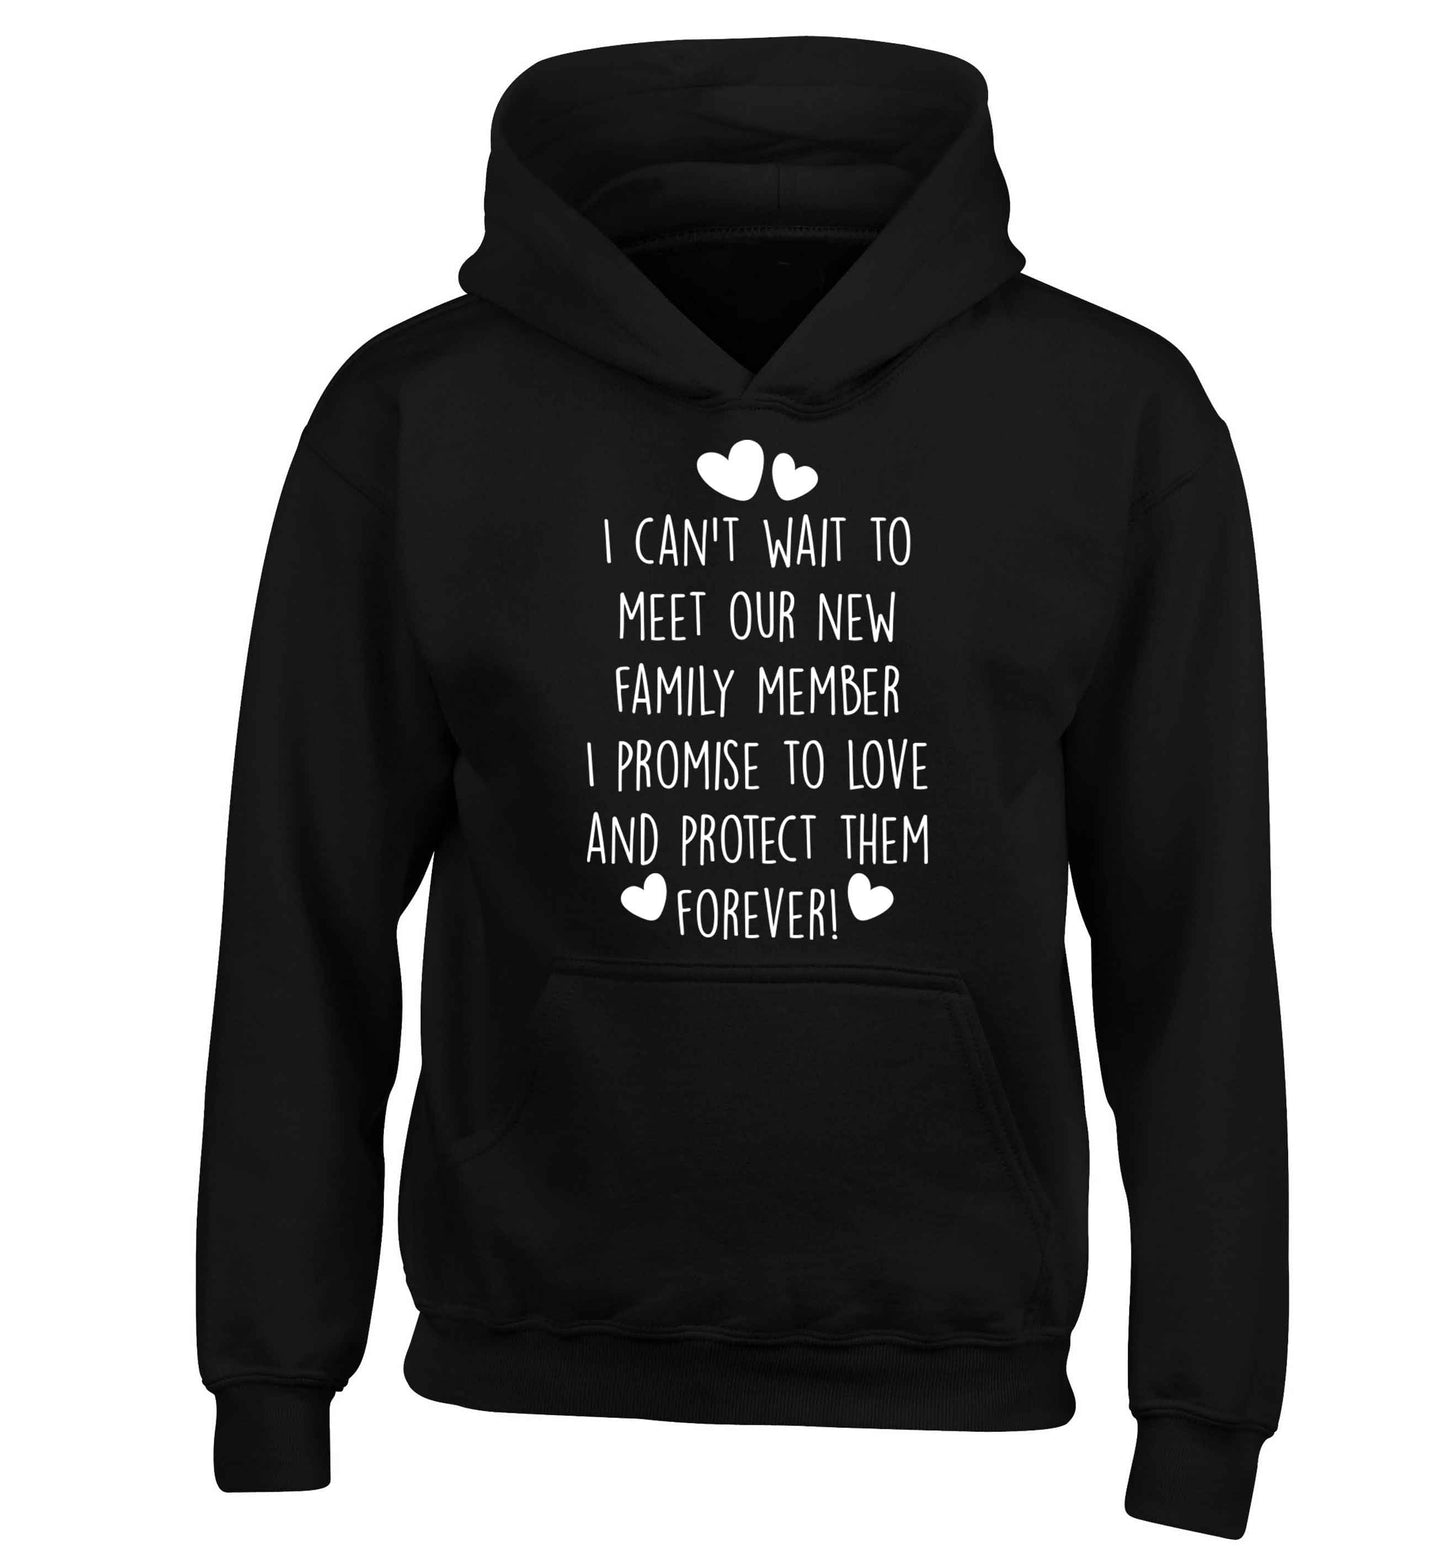 I can't wait to meet our new family member I promise to love and protect them foreverchildren's black hoodie 12-13 Years